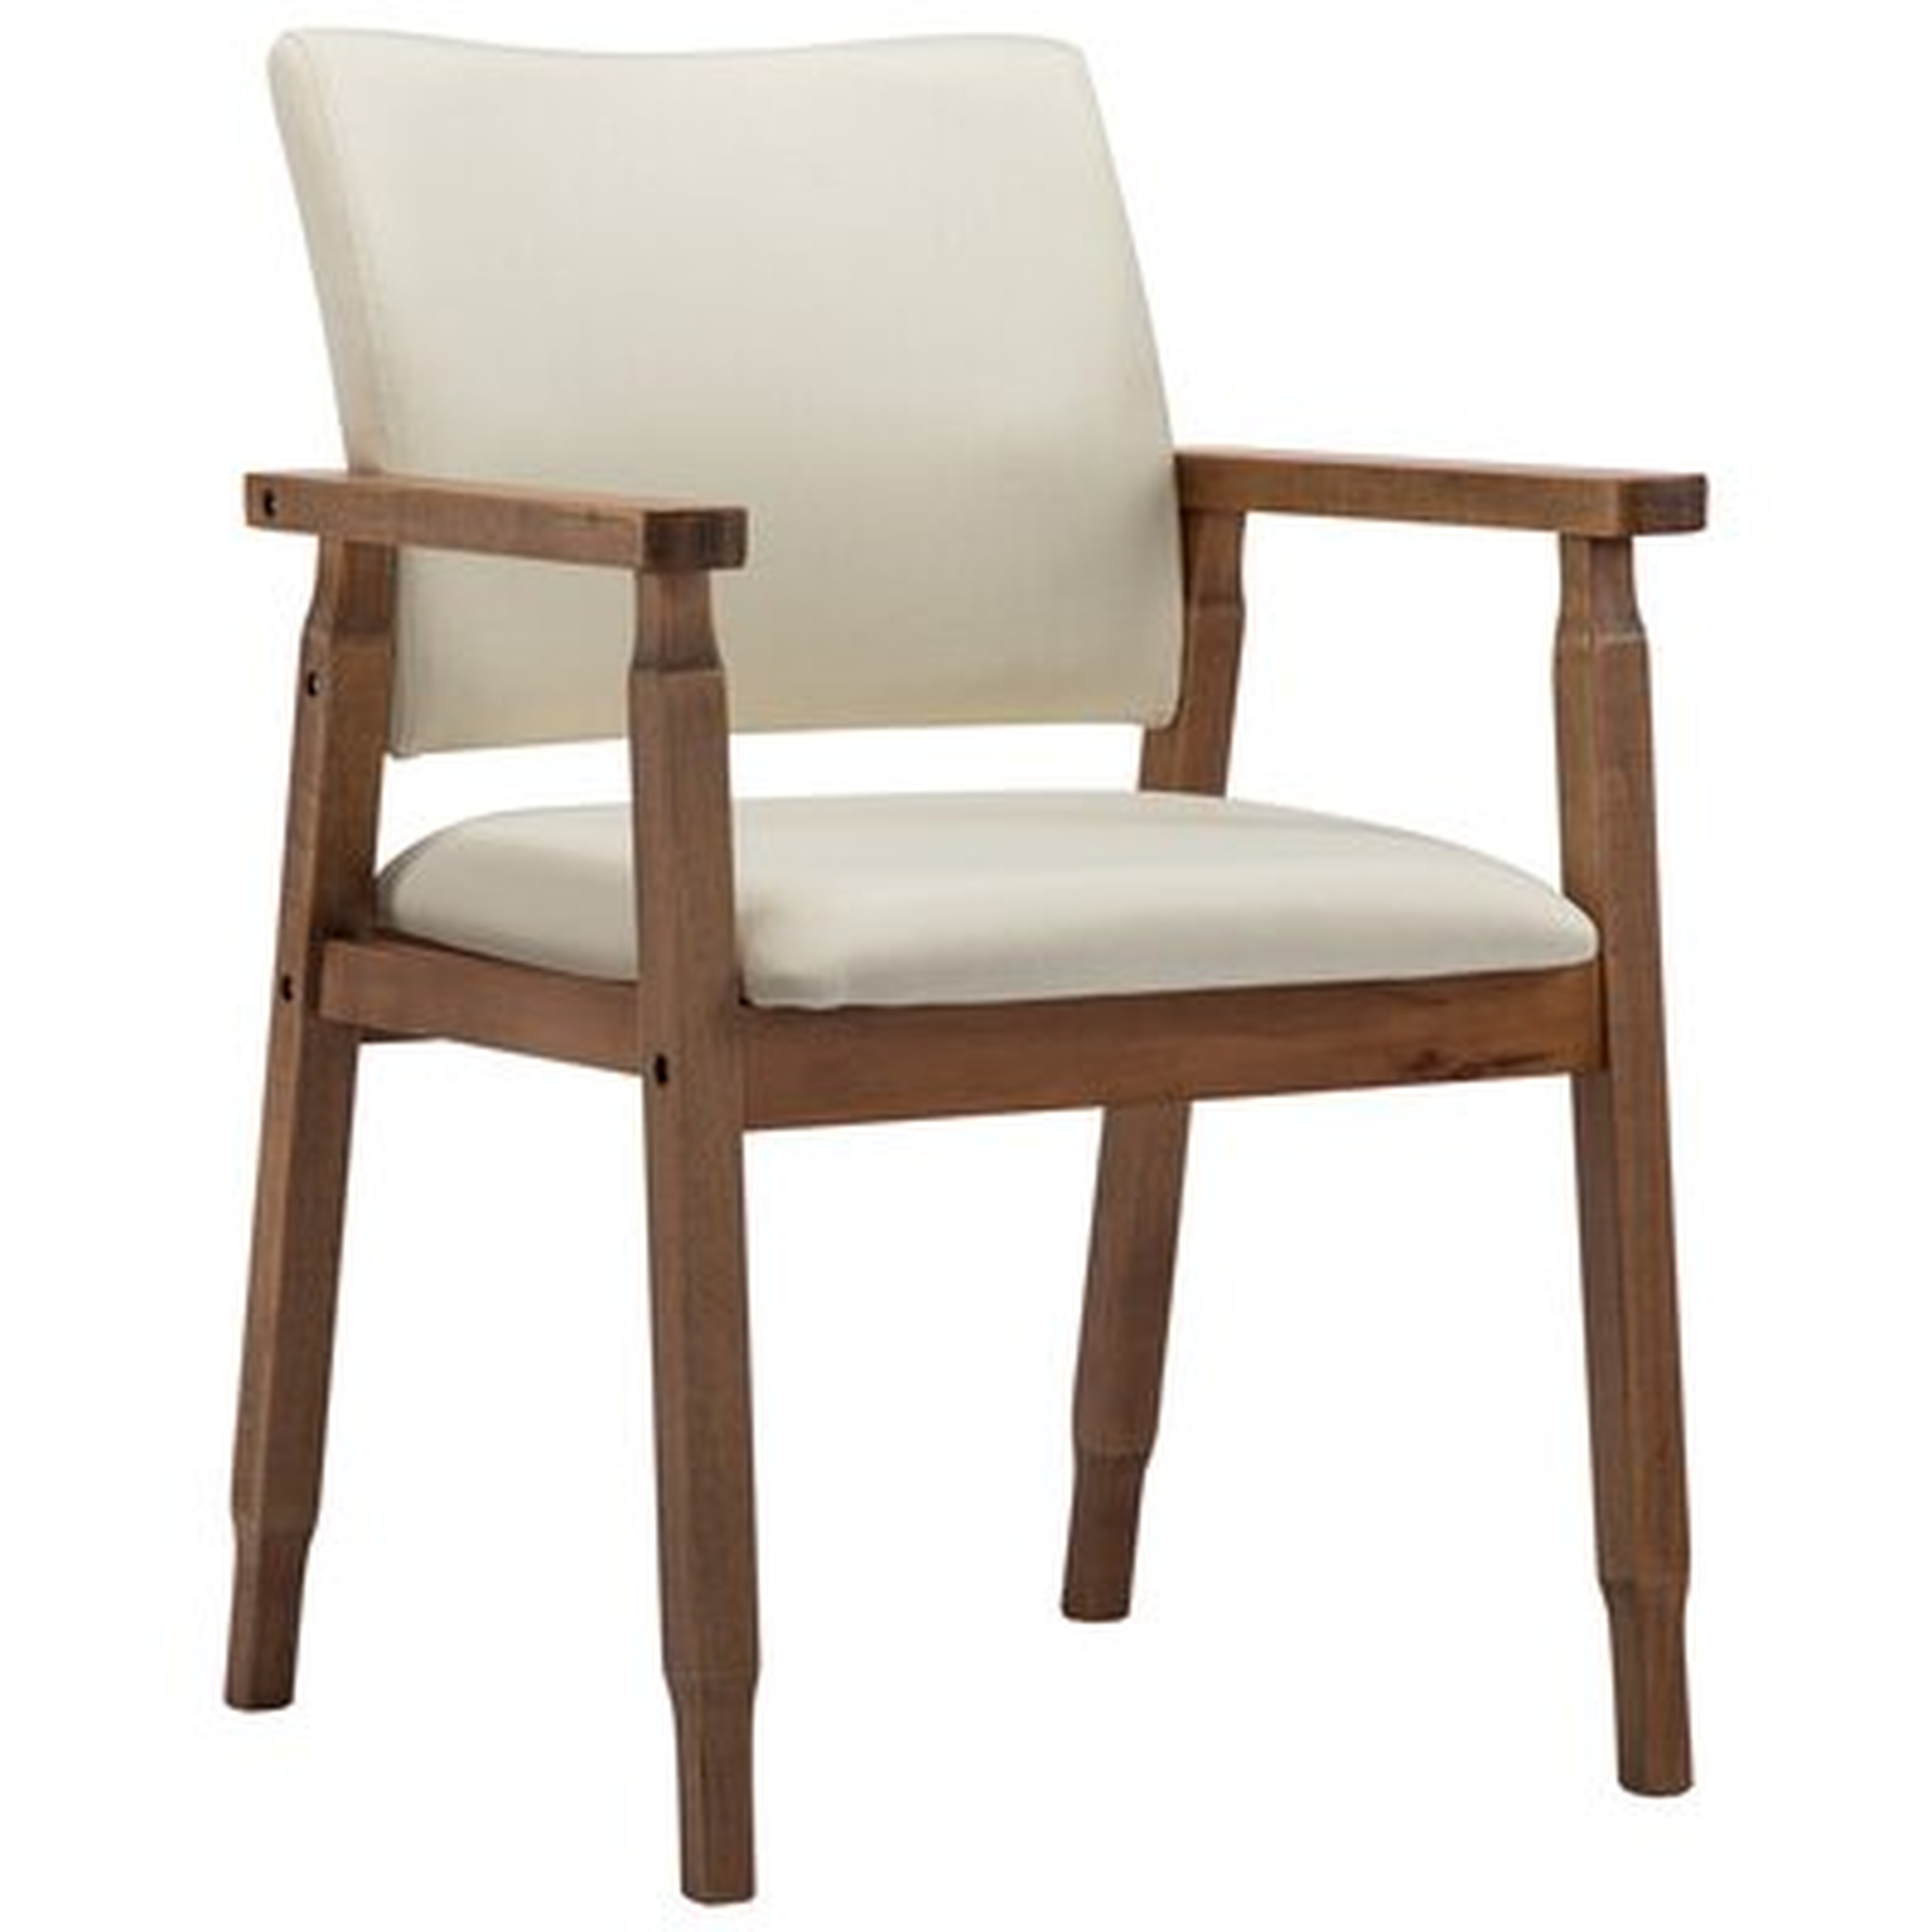 Mid-century Fabric Upholstered Arm Chair, Dining Chair, Beige, Set Of 1 - Wayfair